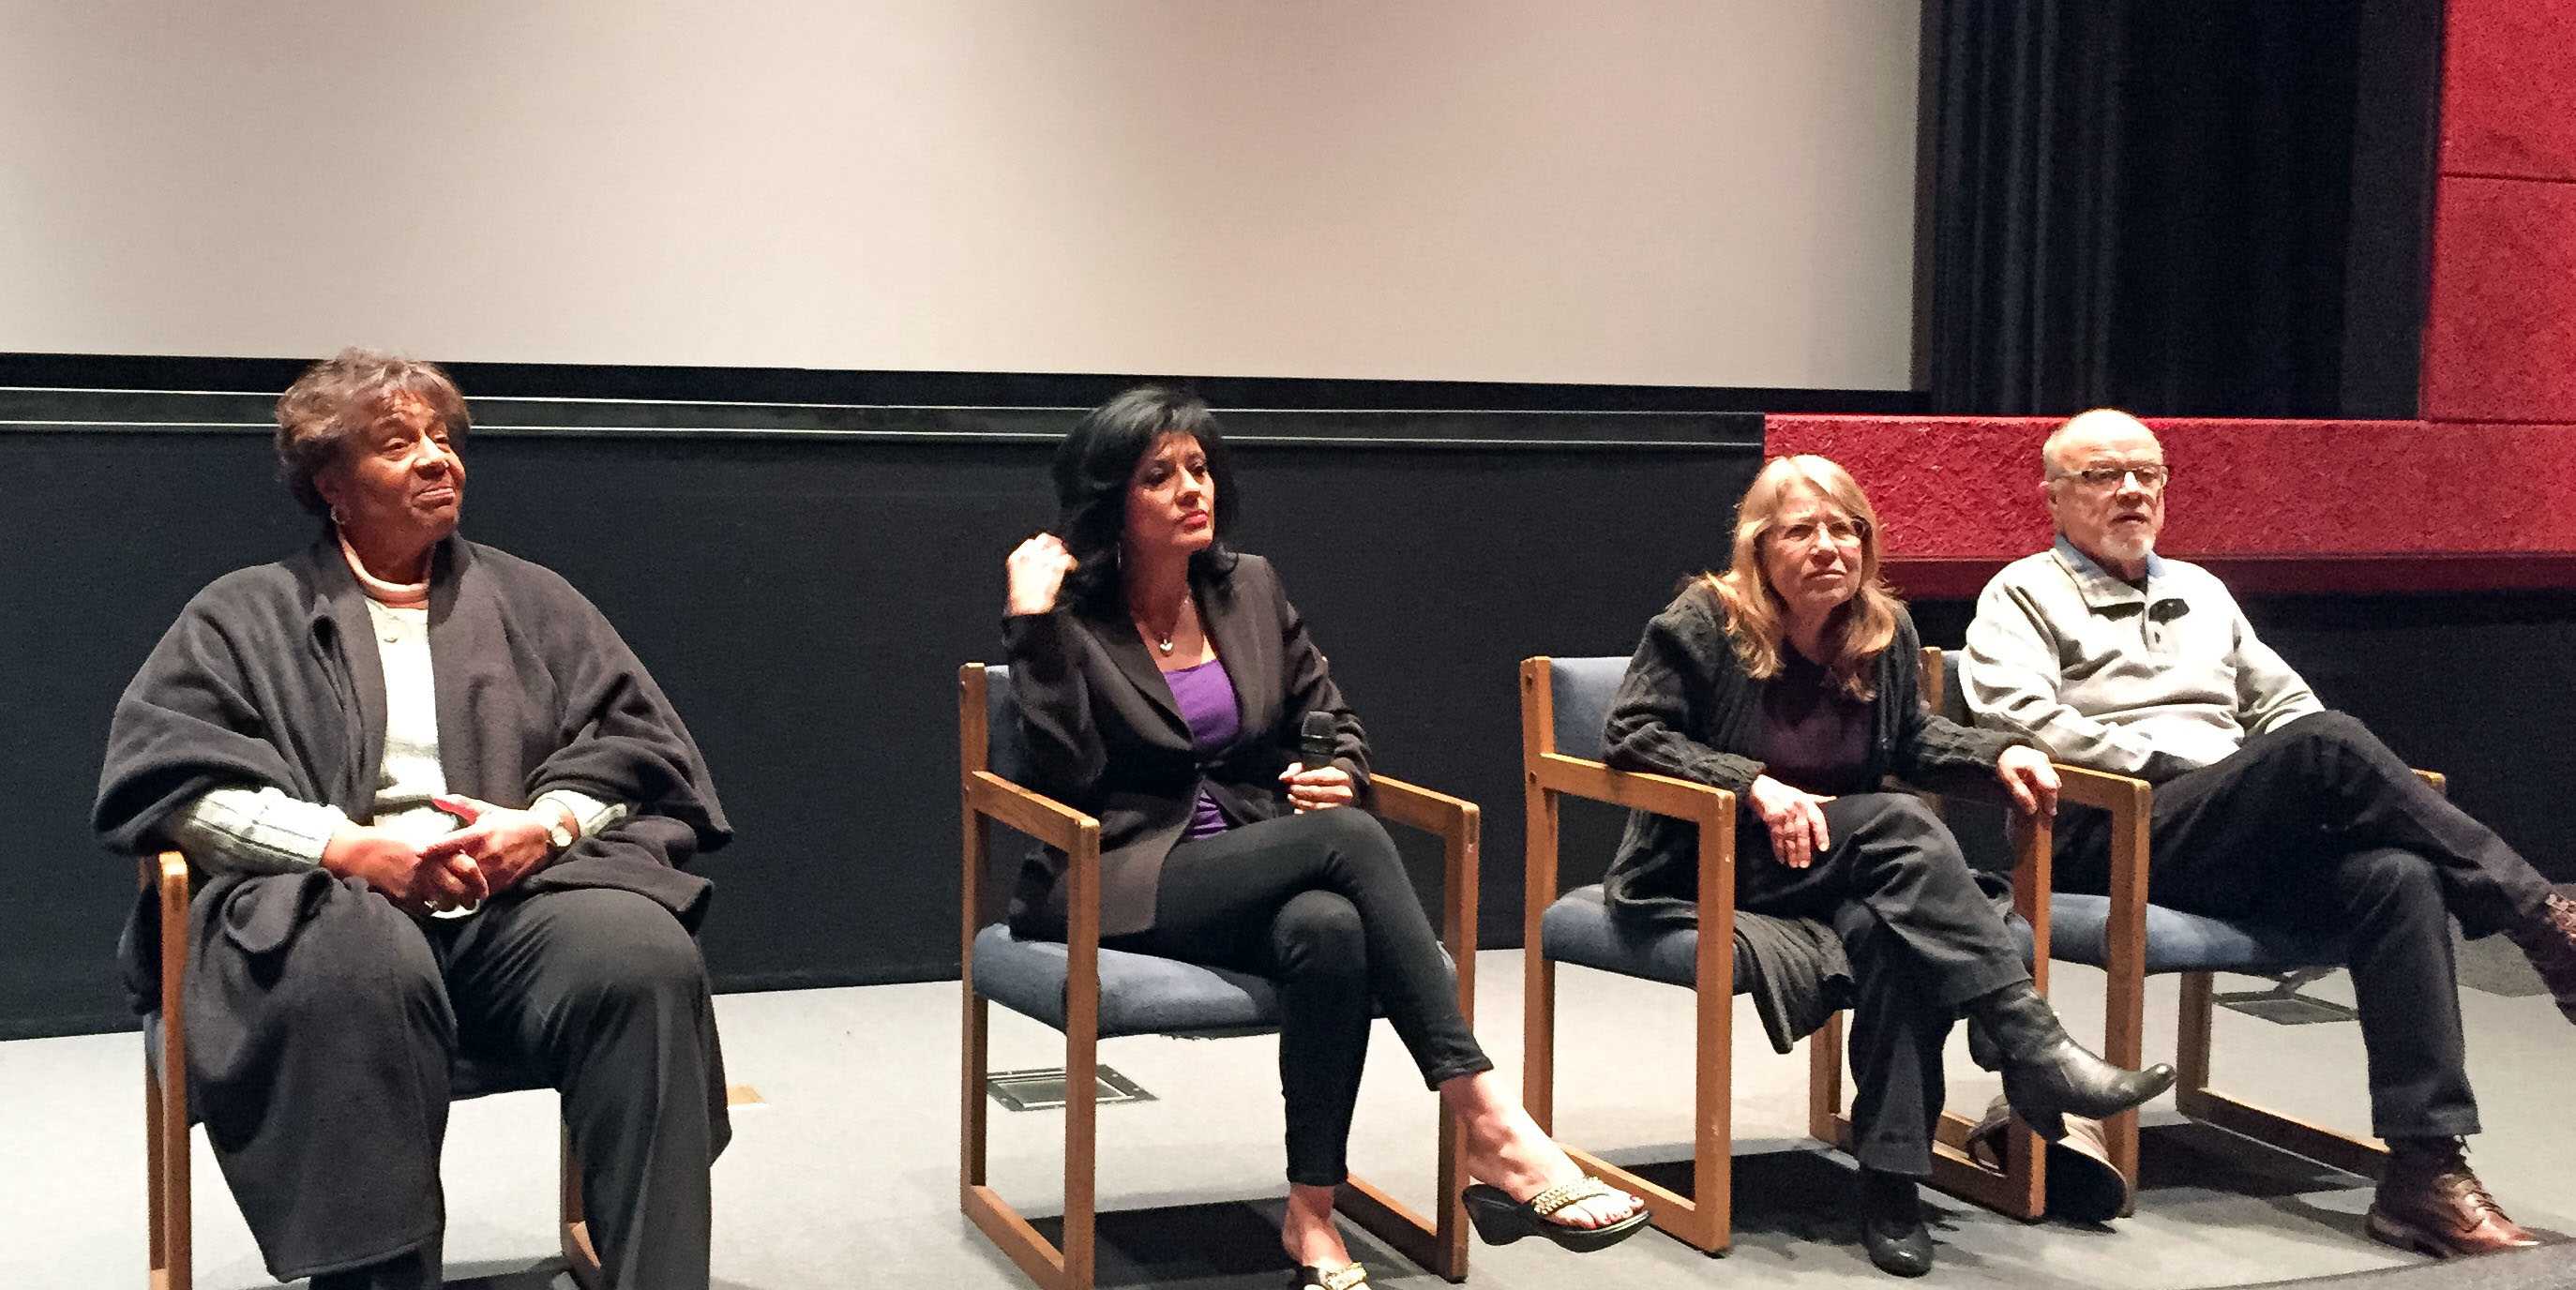 The panel of guests at the documentary screening of Briding the Divide on Monday, Feb. 1. From left: Lorraine Bradley (Tom Bradleys daughter), Alison Sotamyer (producer), Lyn Goldfarb (producer), Kent Kirkton (director of the Tom & Ethel Bradley Foundation at CSUN).